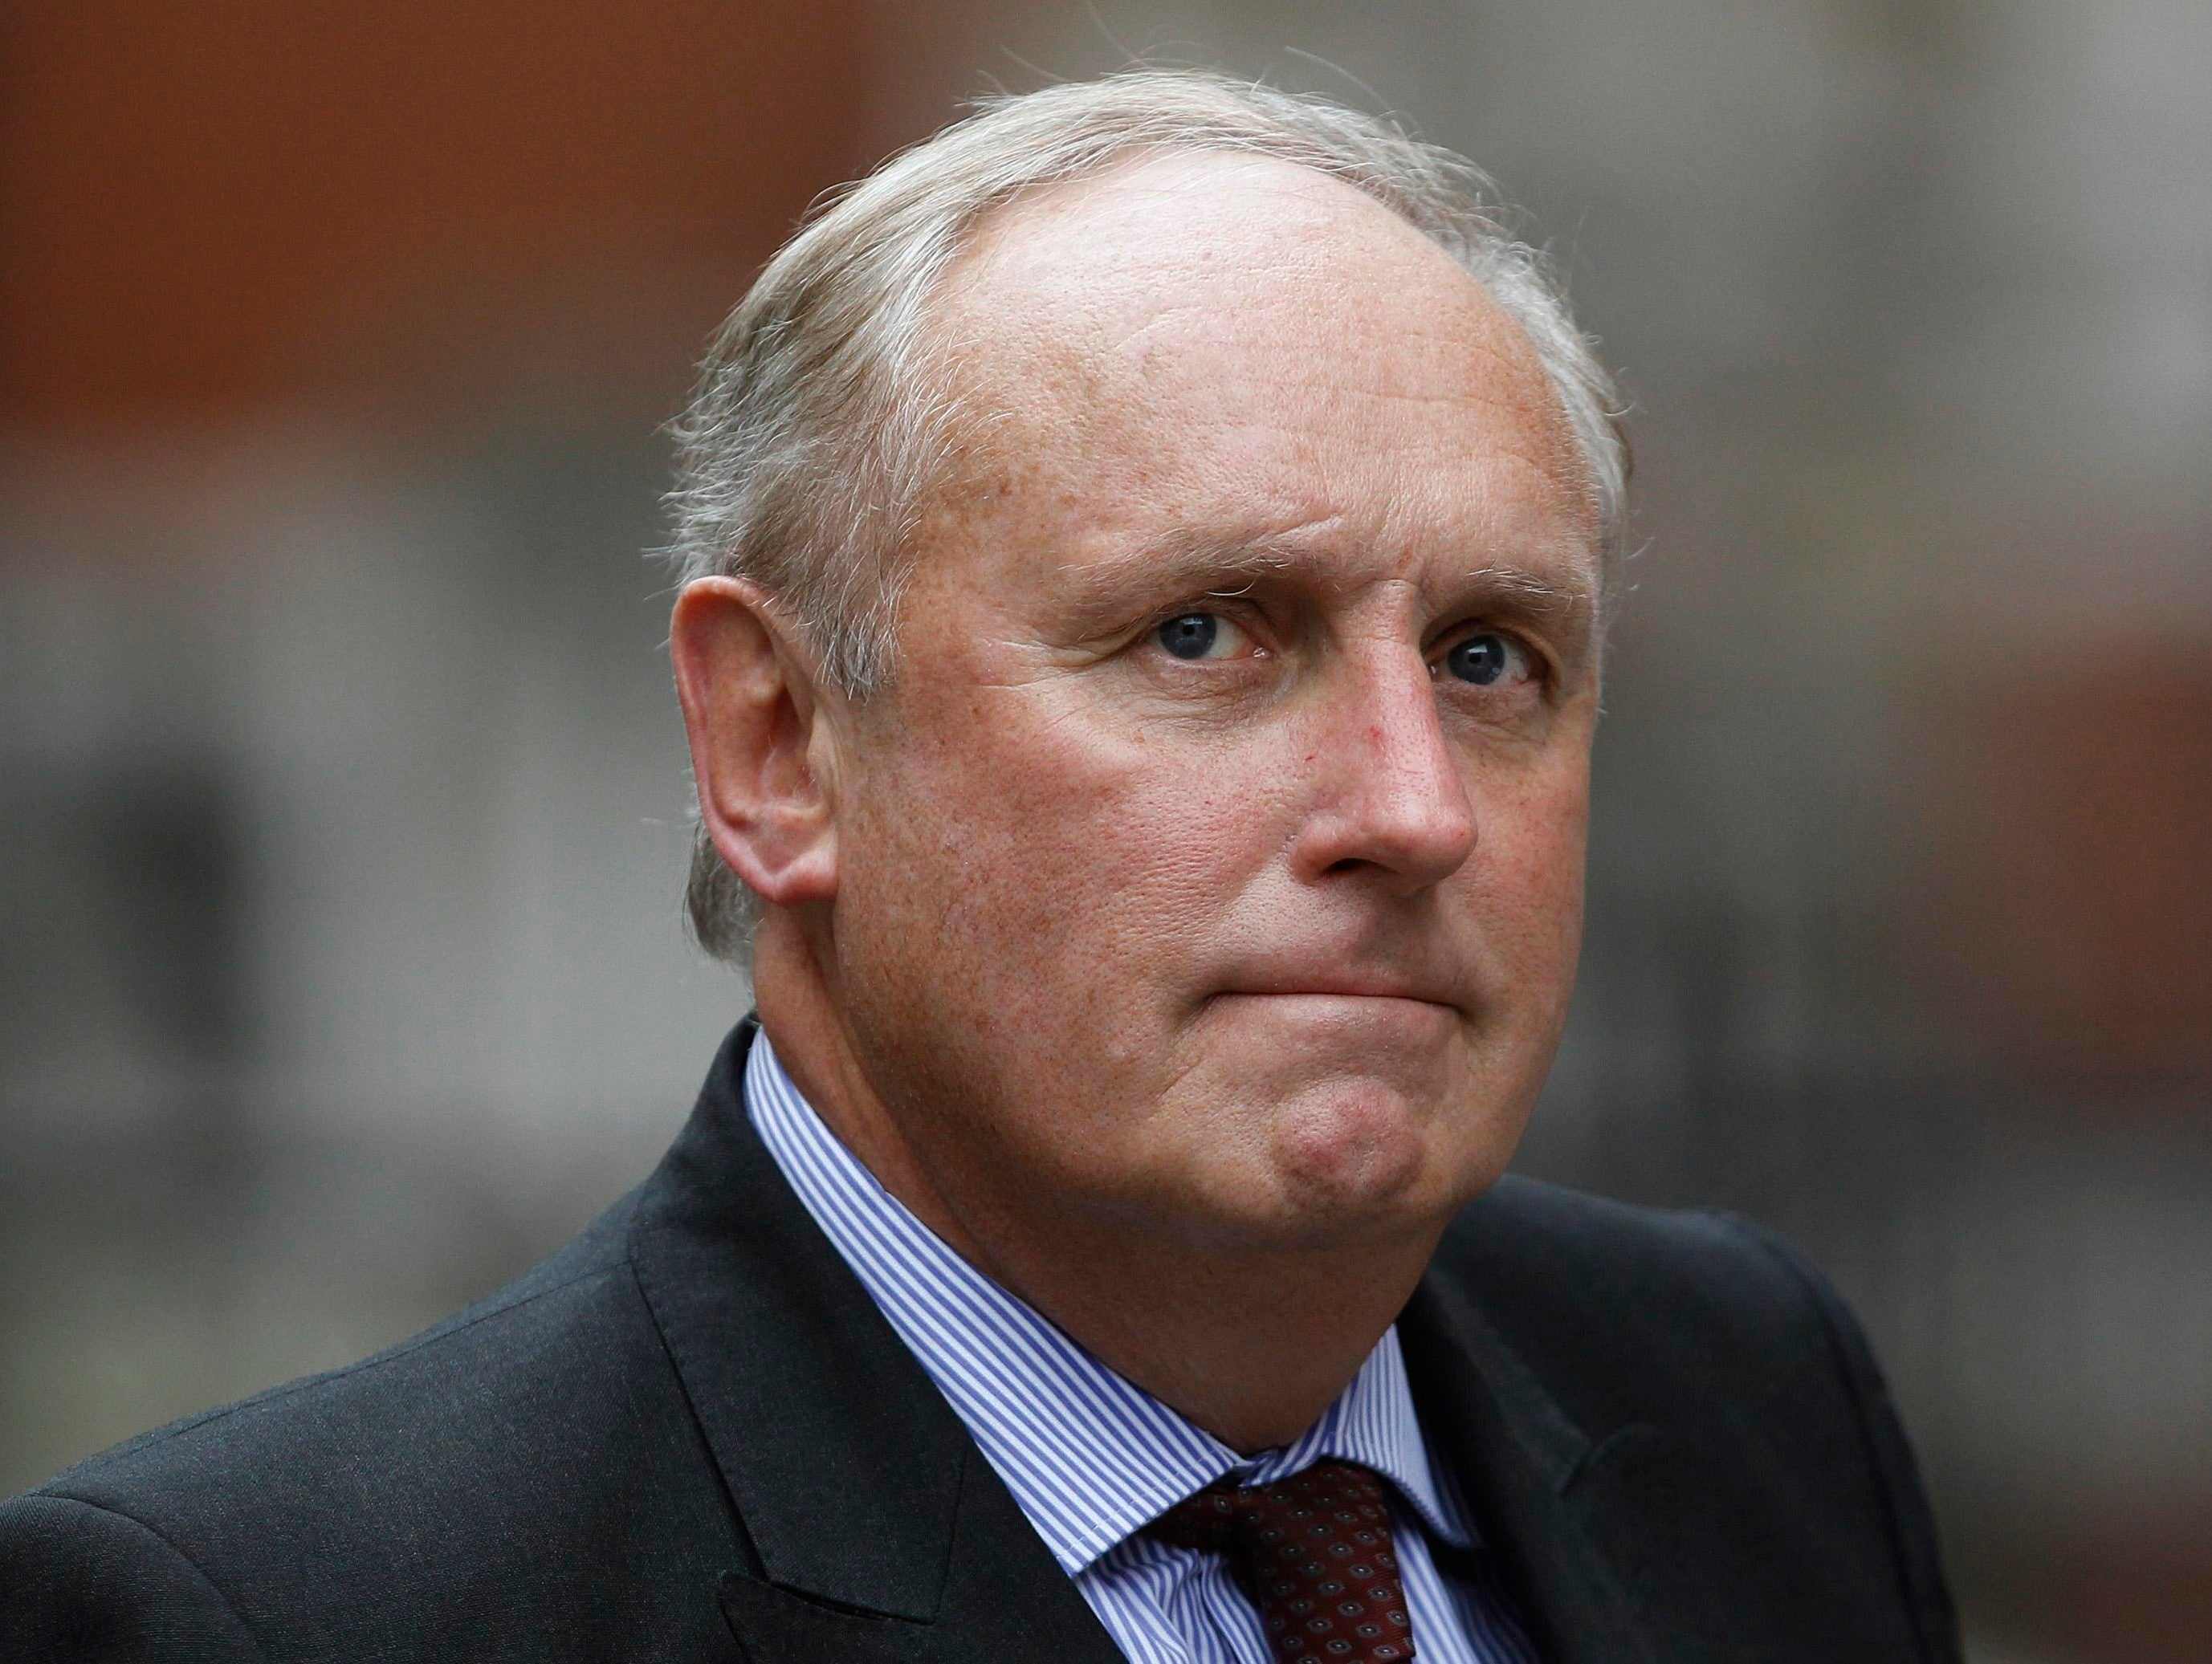 BBC: David Cameron tried to get Paul Dacre sacked as Daily Mail editor because of his Eurosceptic stance